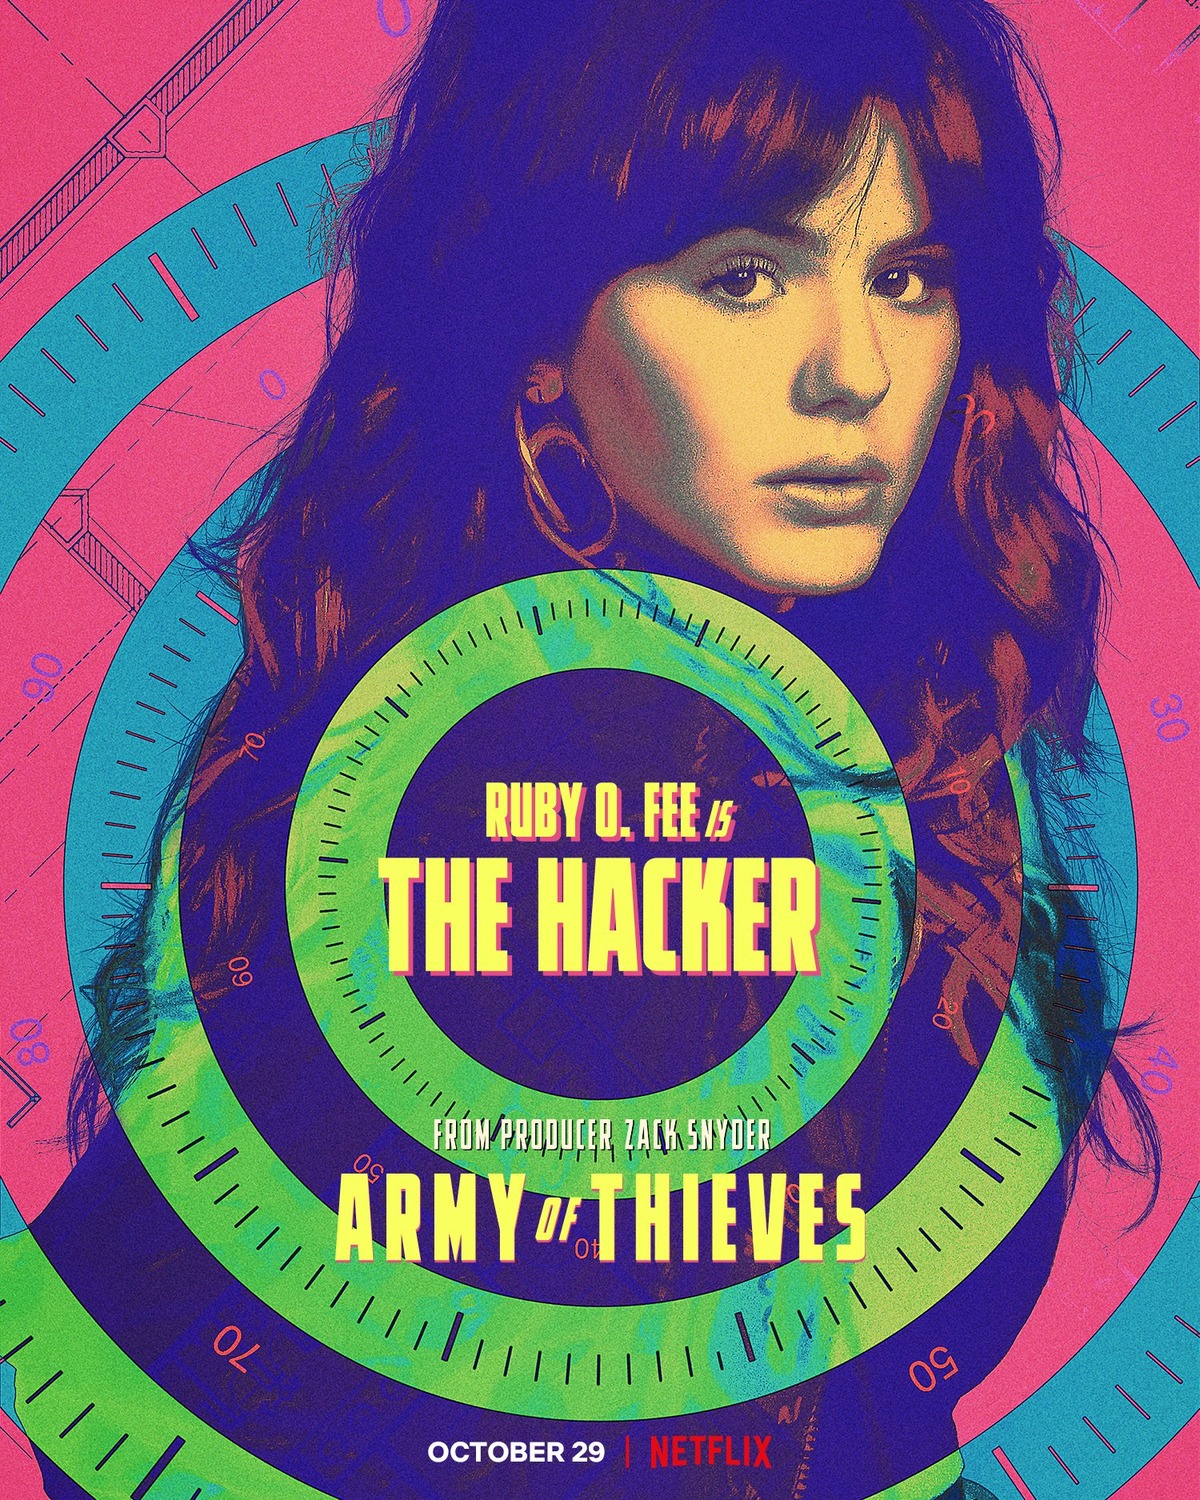 Army of Thieves (2021) Poster - Ruby O. Fee is The Hacker